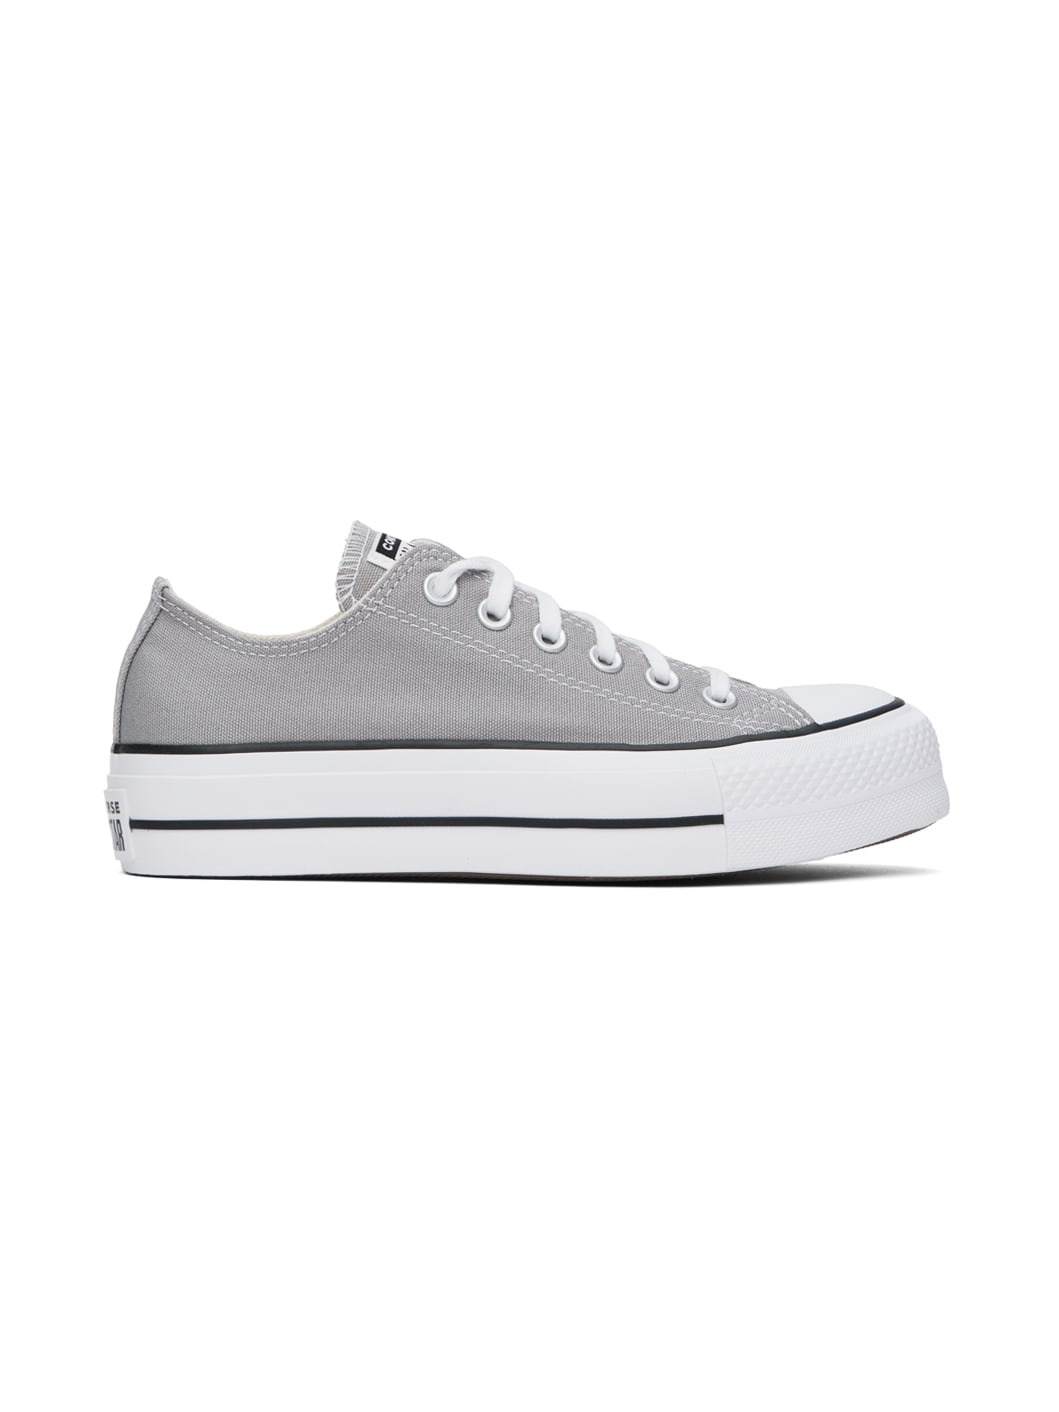 Gray Chuck Taylor All Star Low Top Sneakers - 1